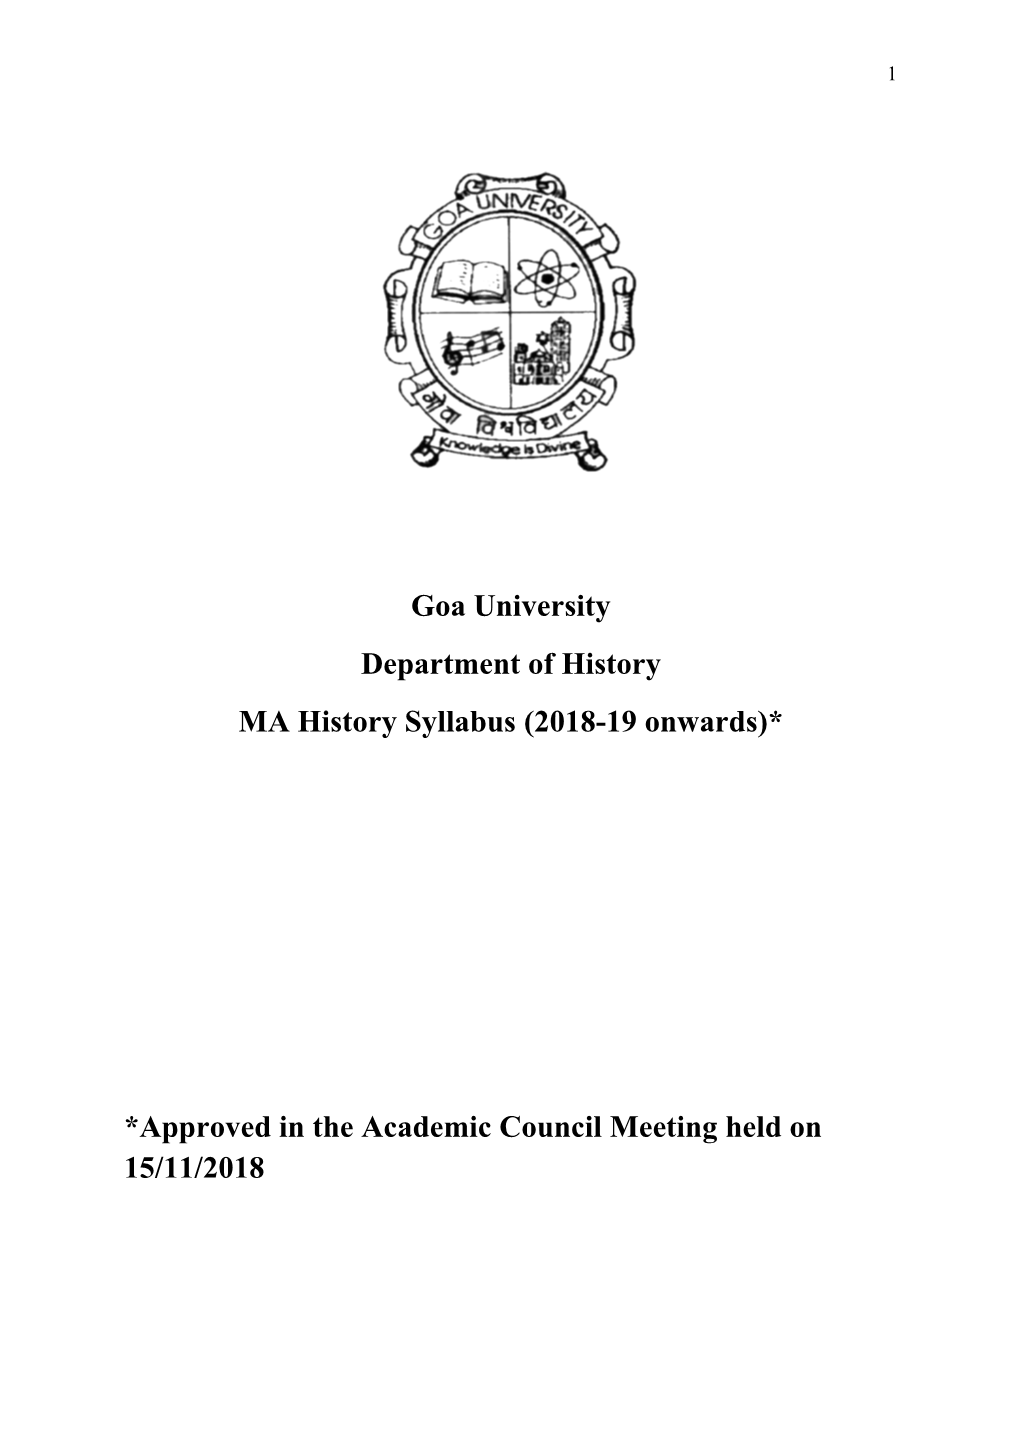 Goa University Department of History MA History Syllabus (2018-19 Onwards)* *Approved in the Academic Council Meeting Held on 15